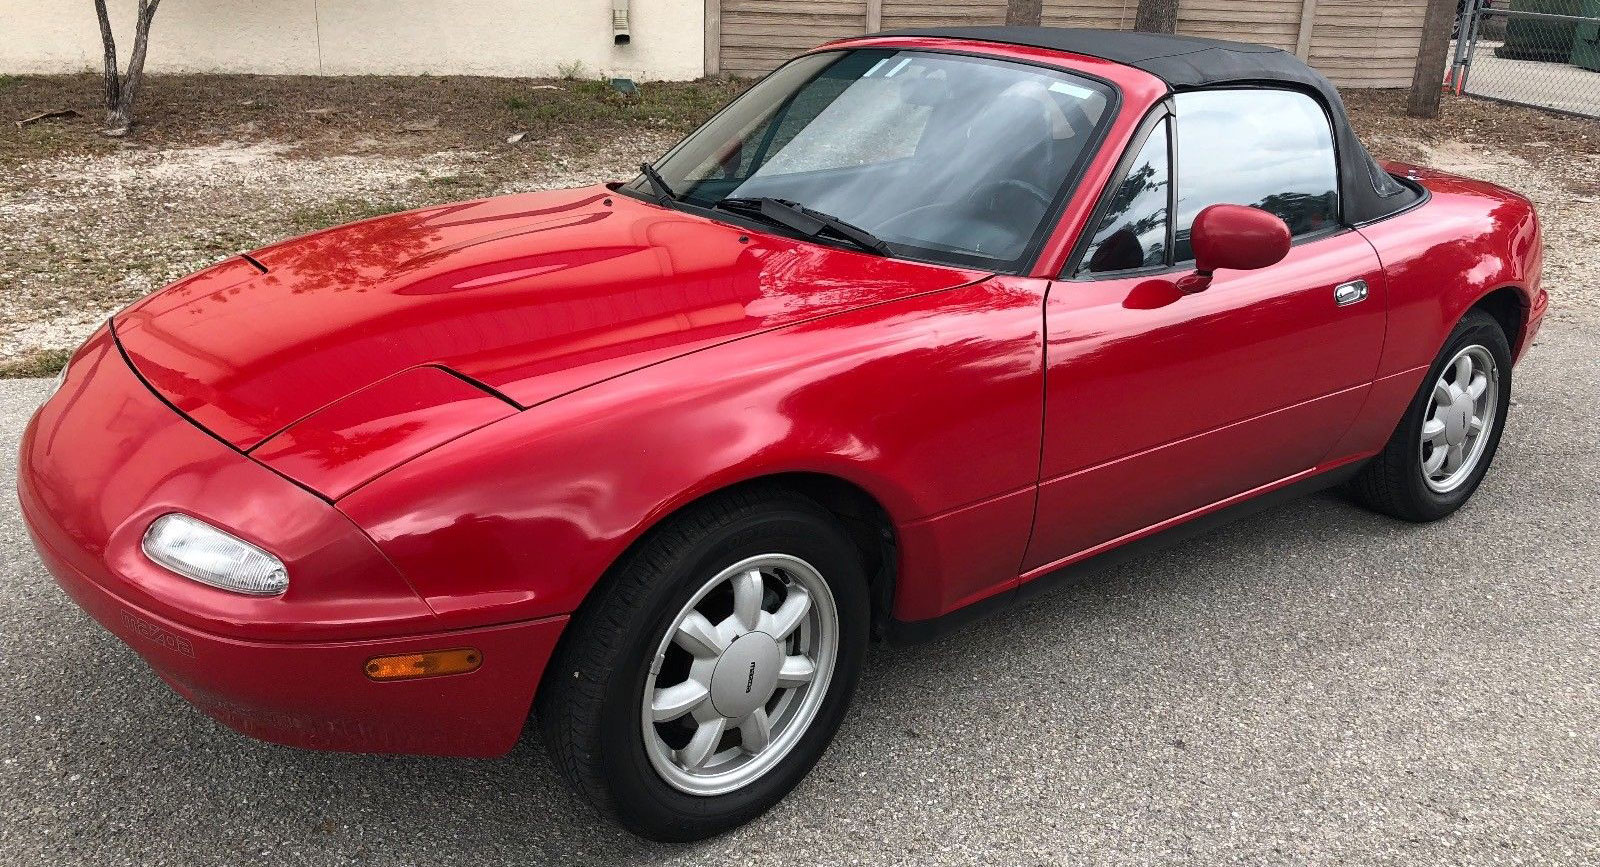 Mazda Miata FAQs: Top Questions About the MX-5